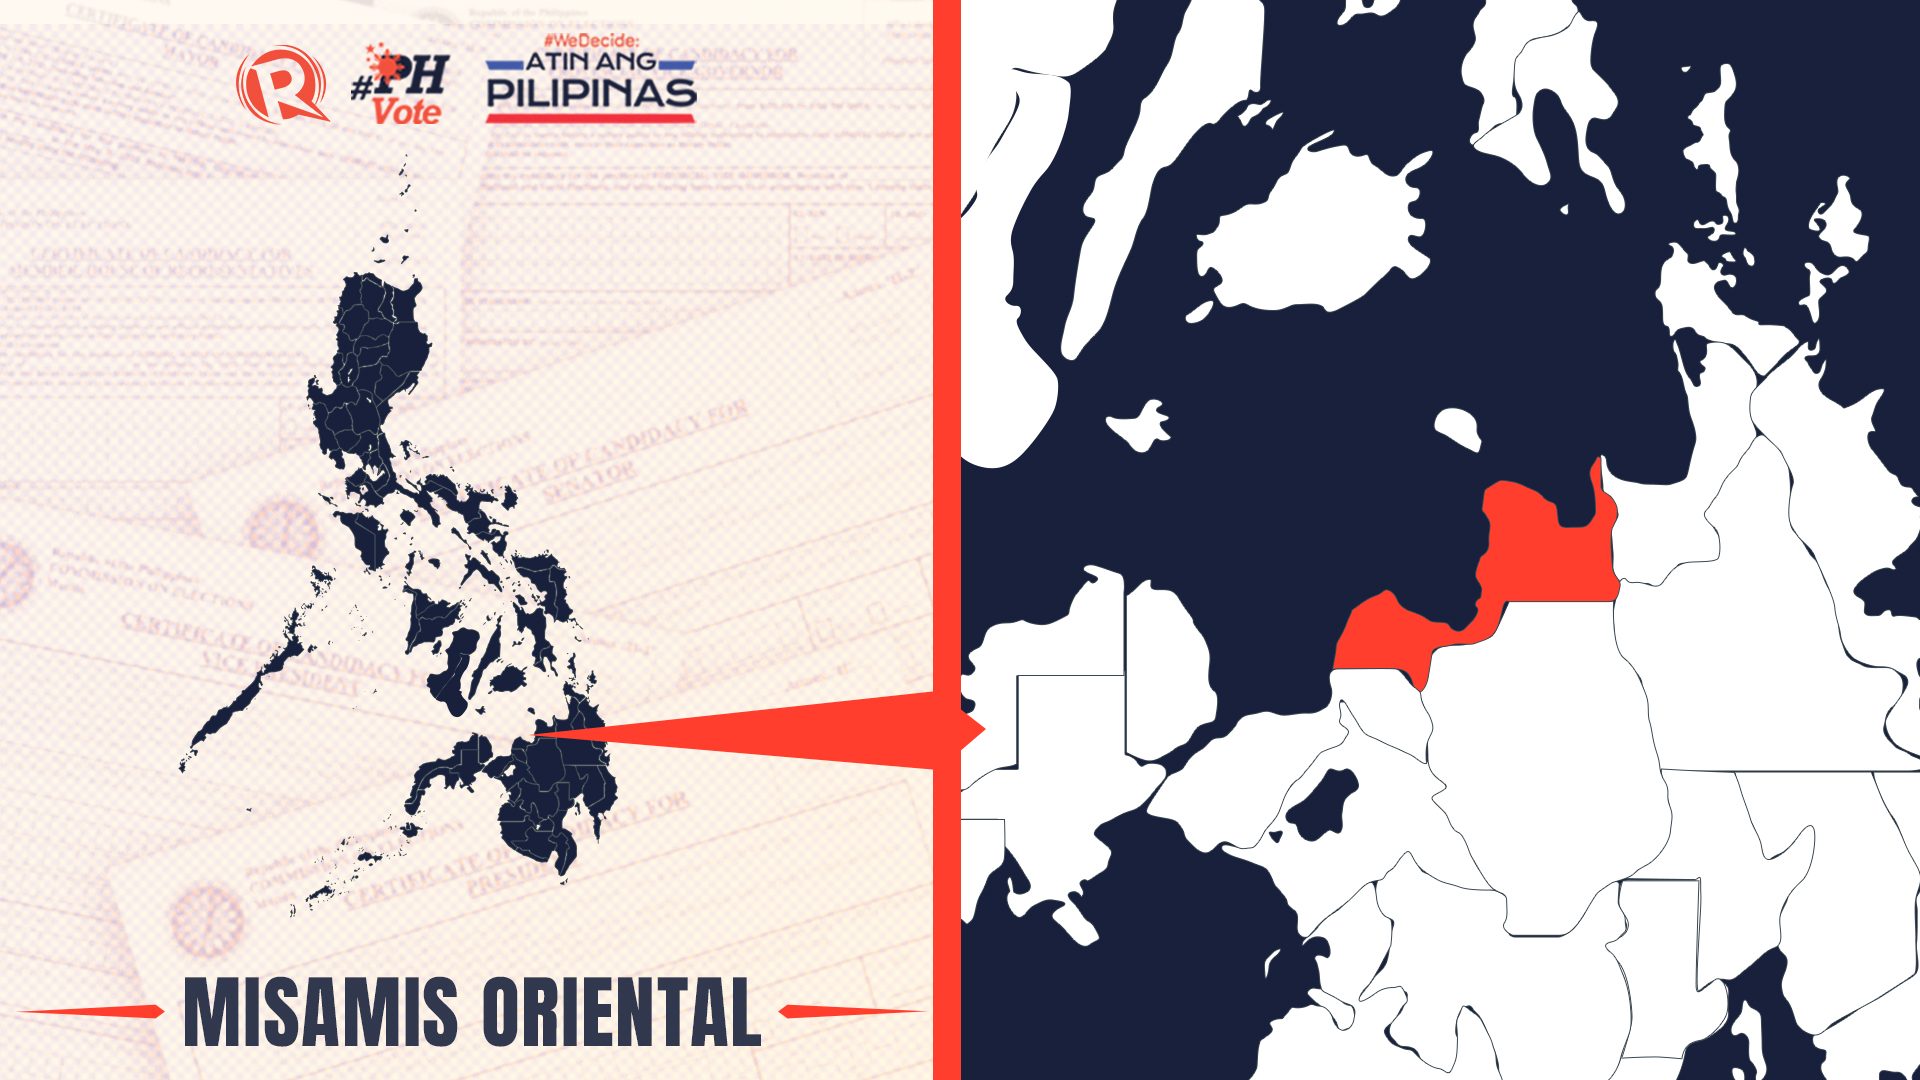 LIST: Who is running in Misamis Oriental in the 2022 Philippine elections?